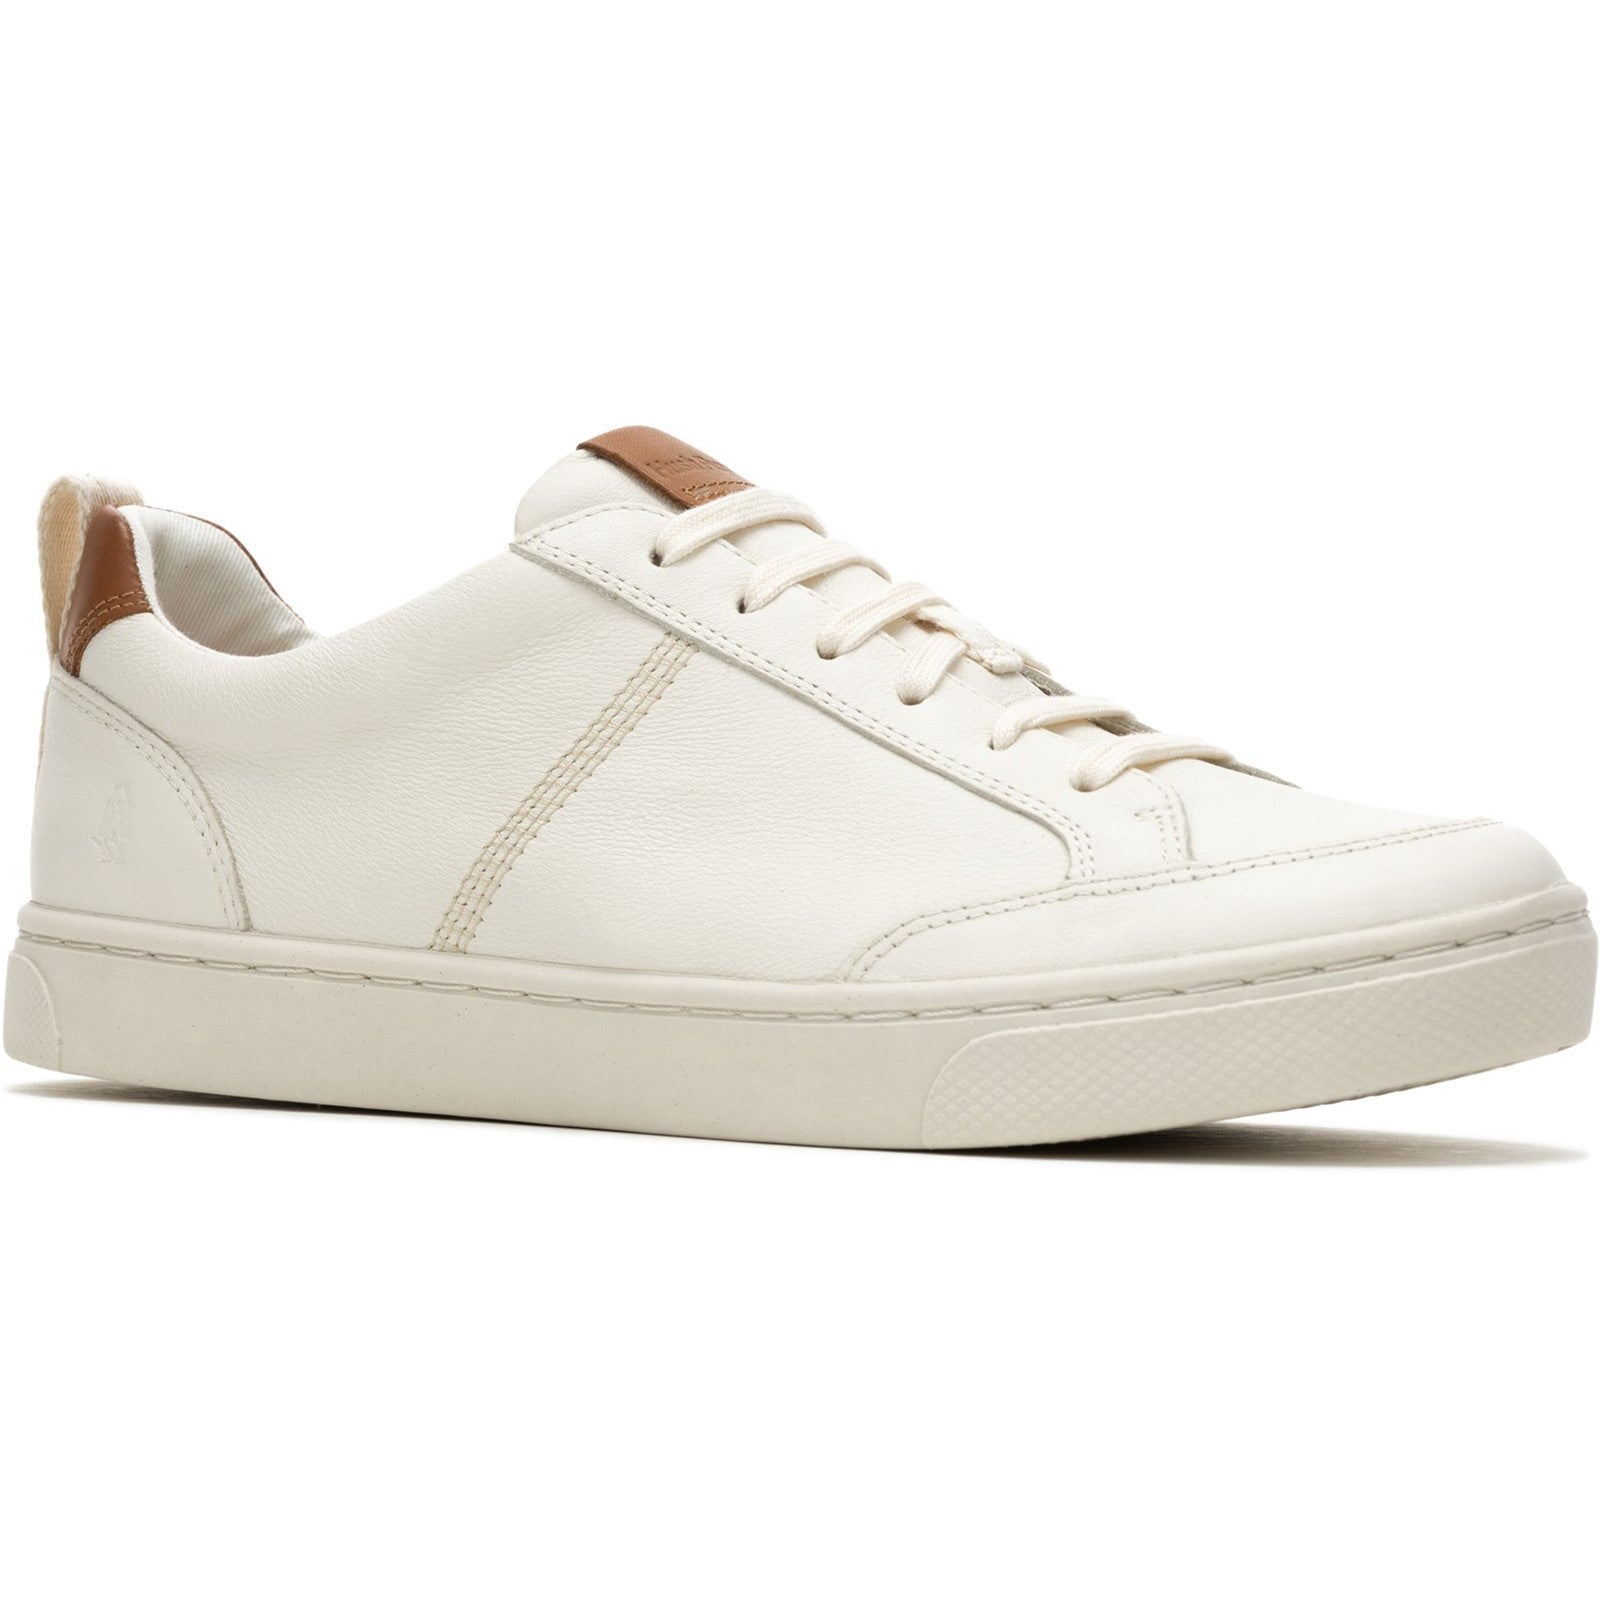 Mens Sports White Hush Puppies The Good Low Top Shoe